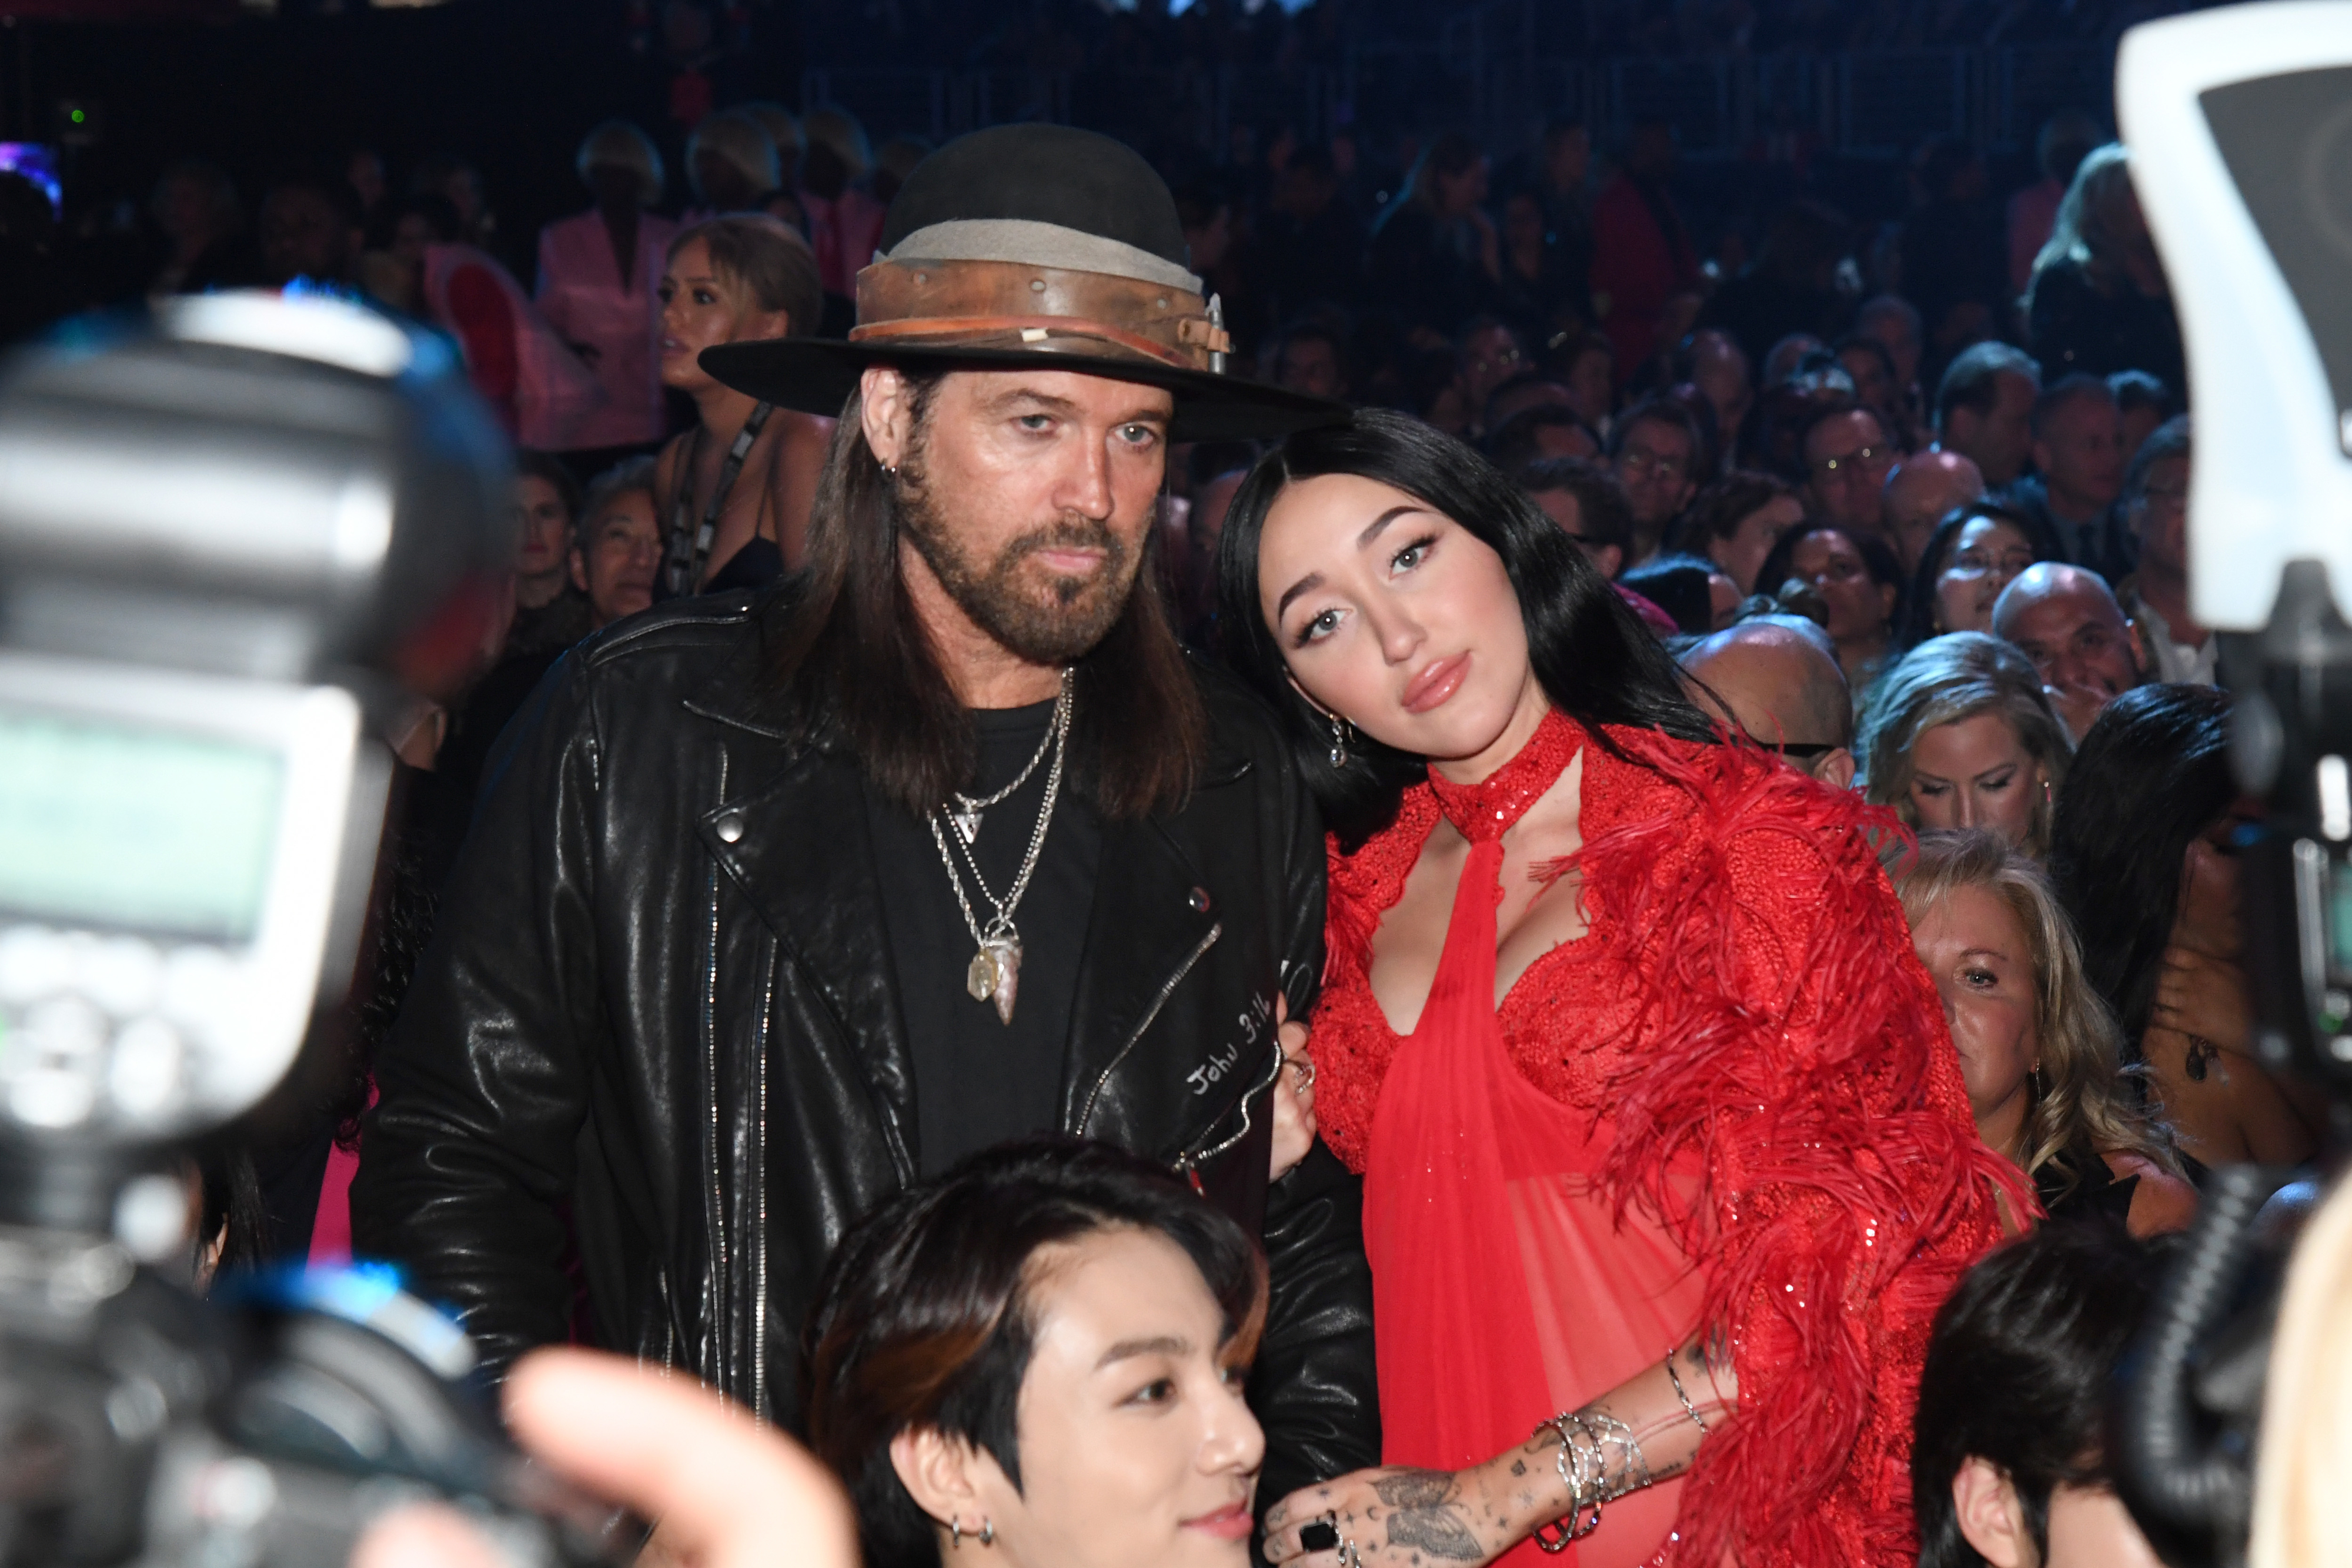 Billy Ray Cyrus and Noah Cyrus at an event, with Billy wearing a hat and leather jacket, Tish in a ruffled outfit